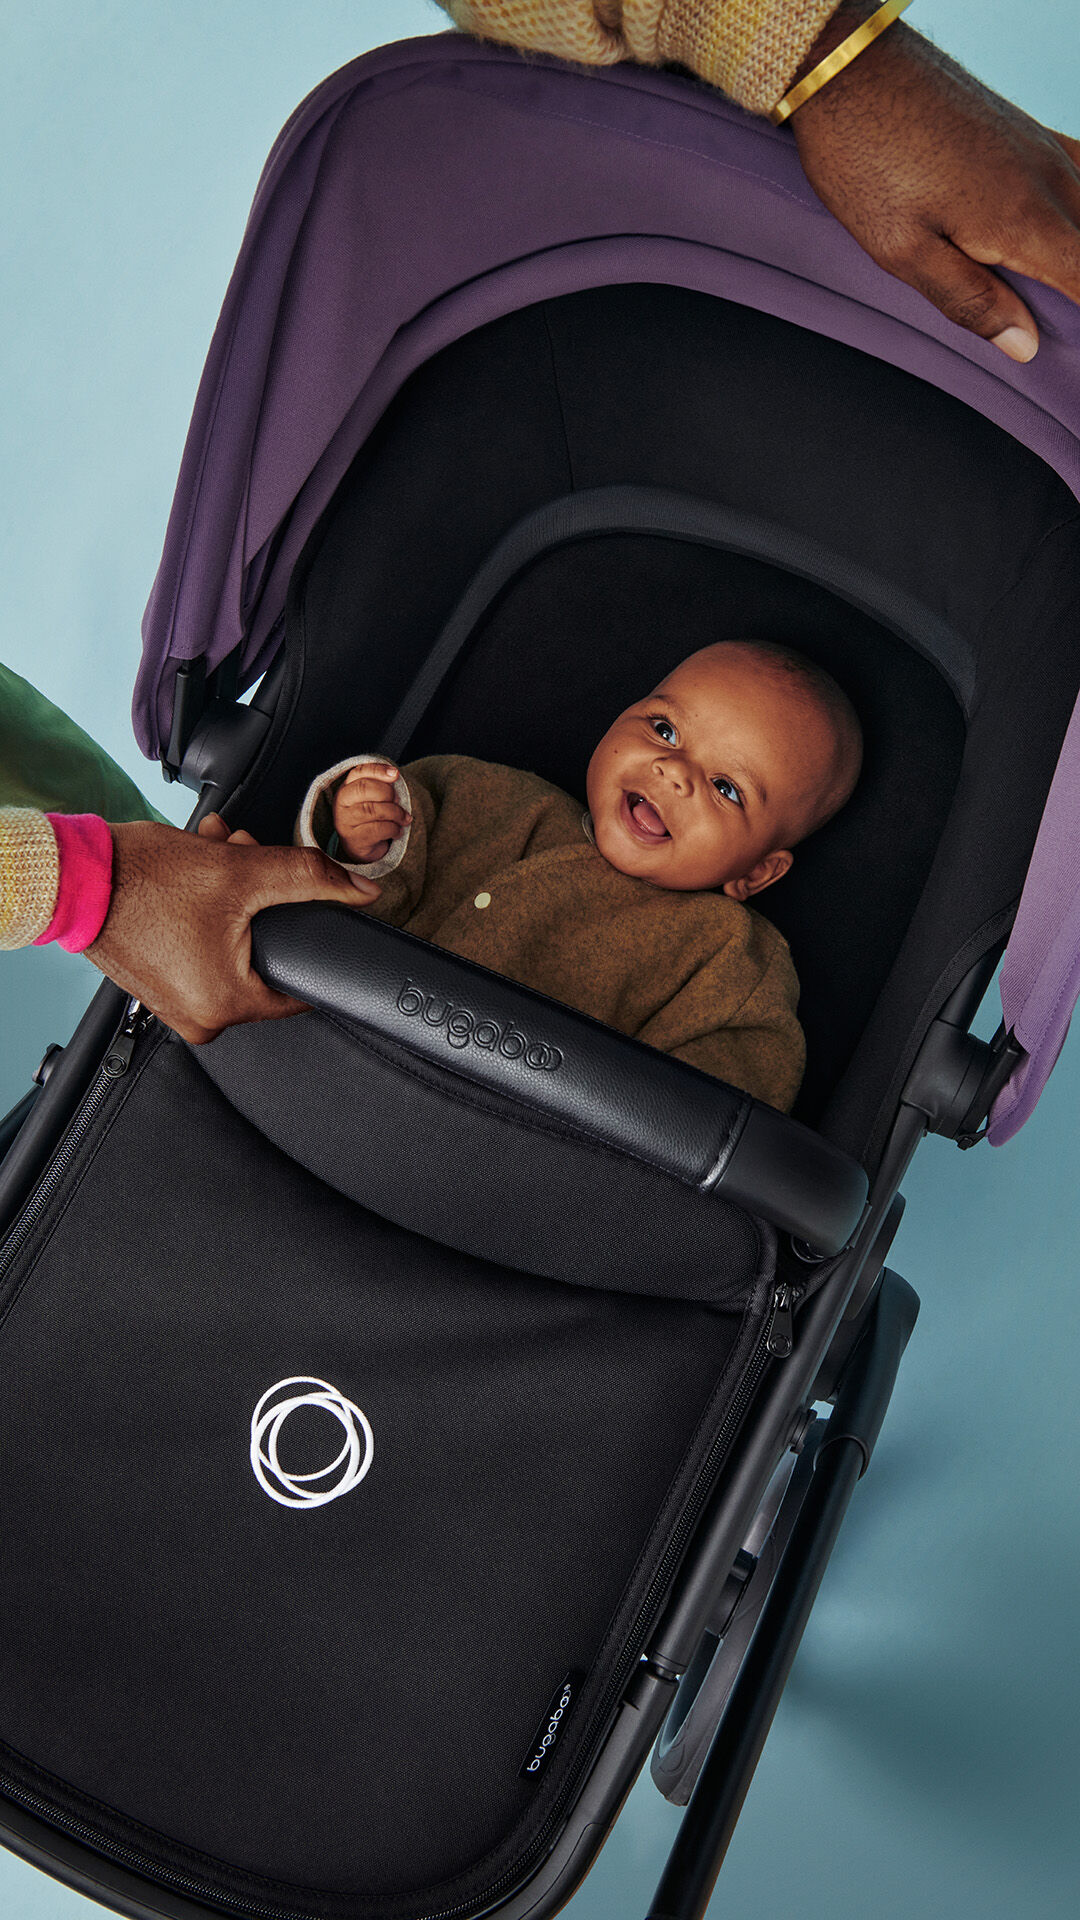 Baby smiling inside a Bugaboo bassinet.